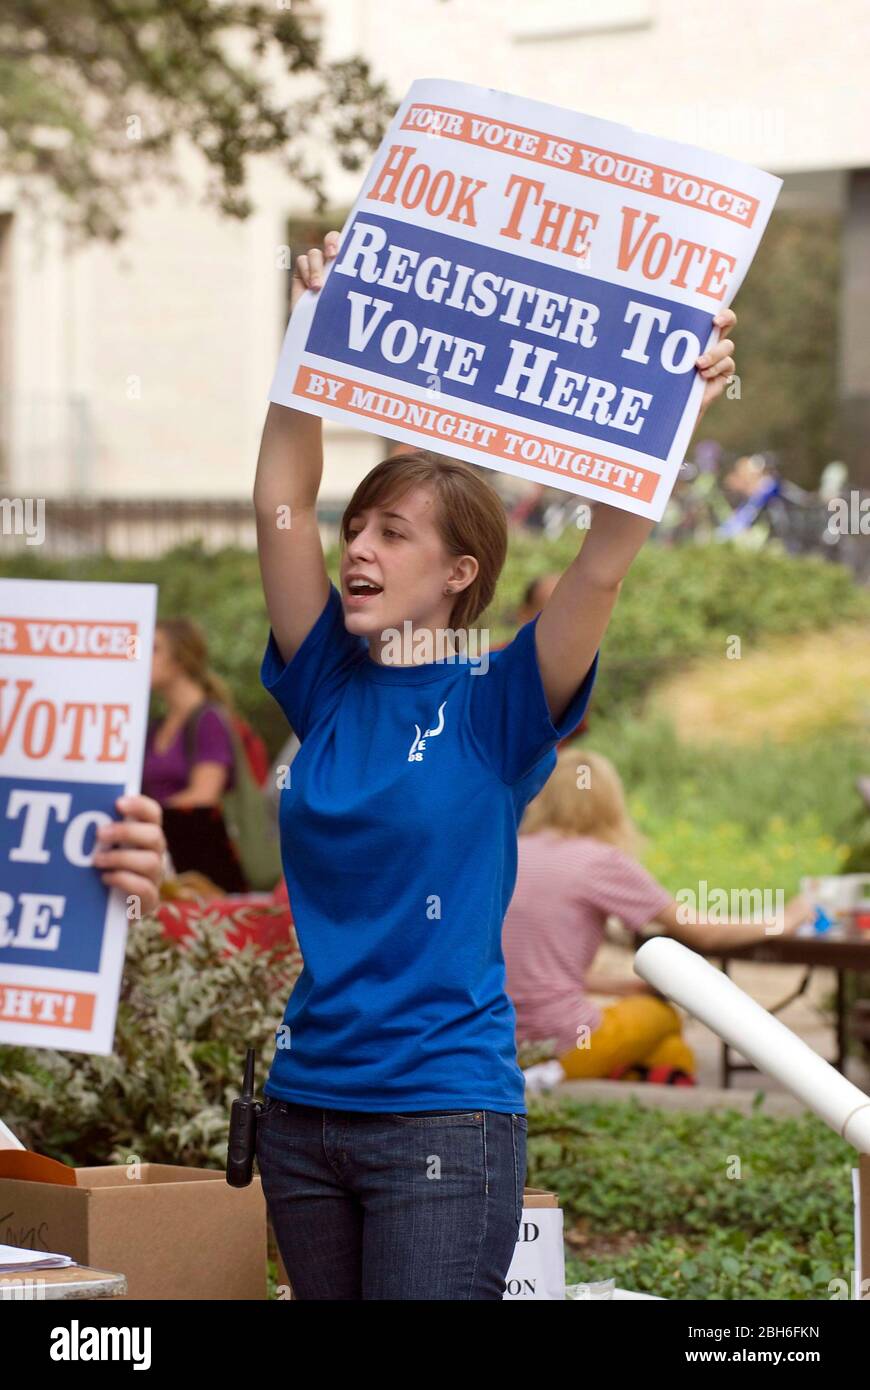 Austin, Texas USA, October 6  2008: Students on the University of Texas campus wave signs to attract prospective voters to register before the deadline for registration to vote in  the upcoming presidential election.  ©Marjorie Kamys Cotera/Daemmrich Photography Stock Photo